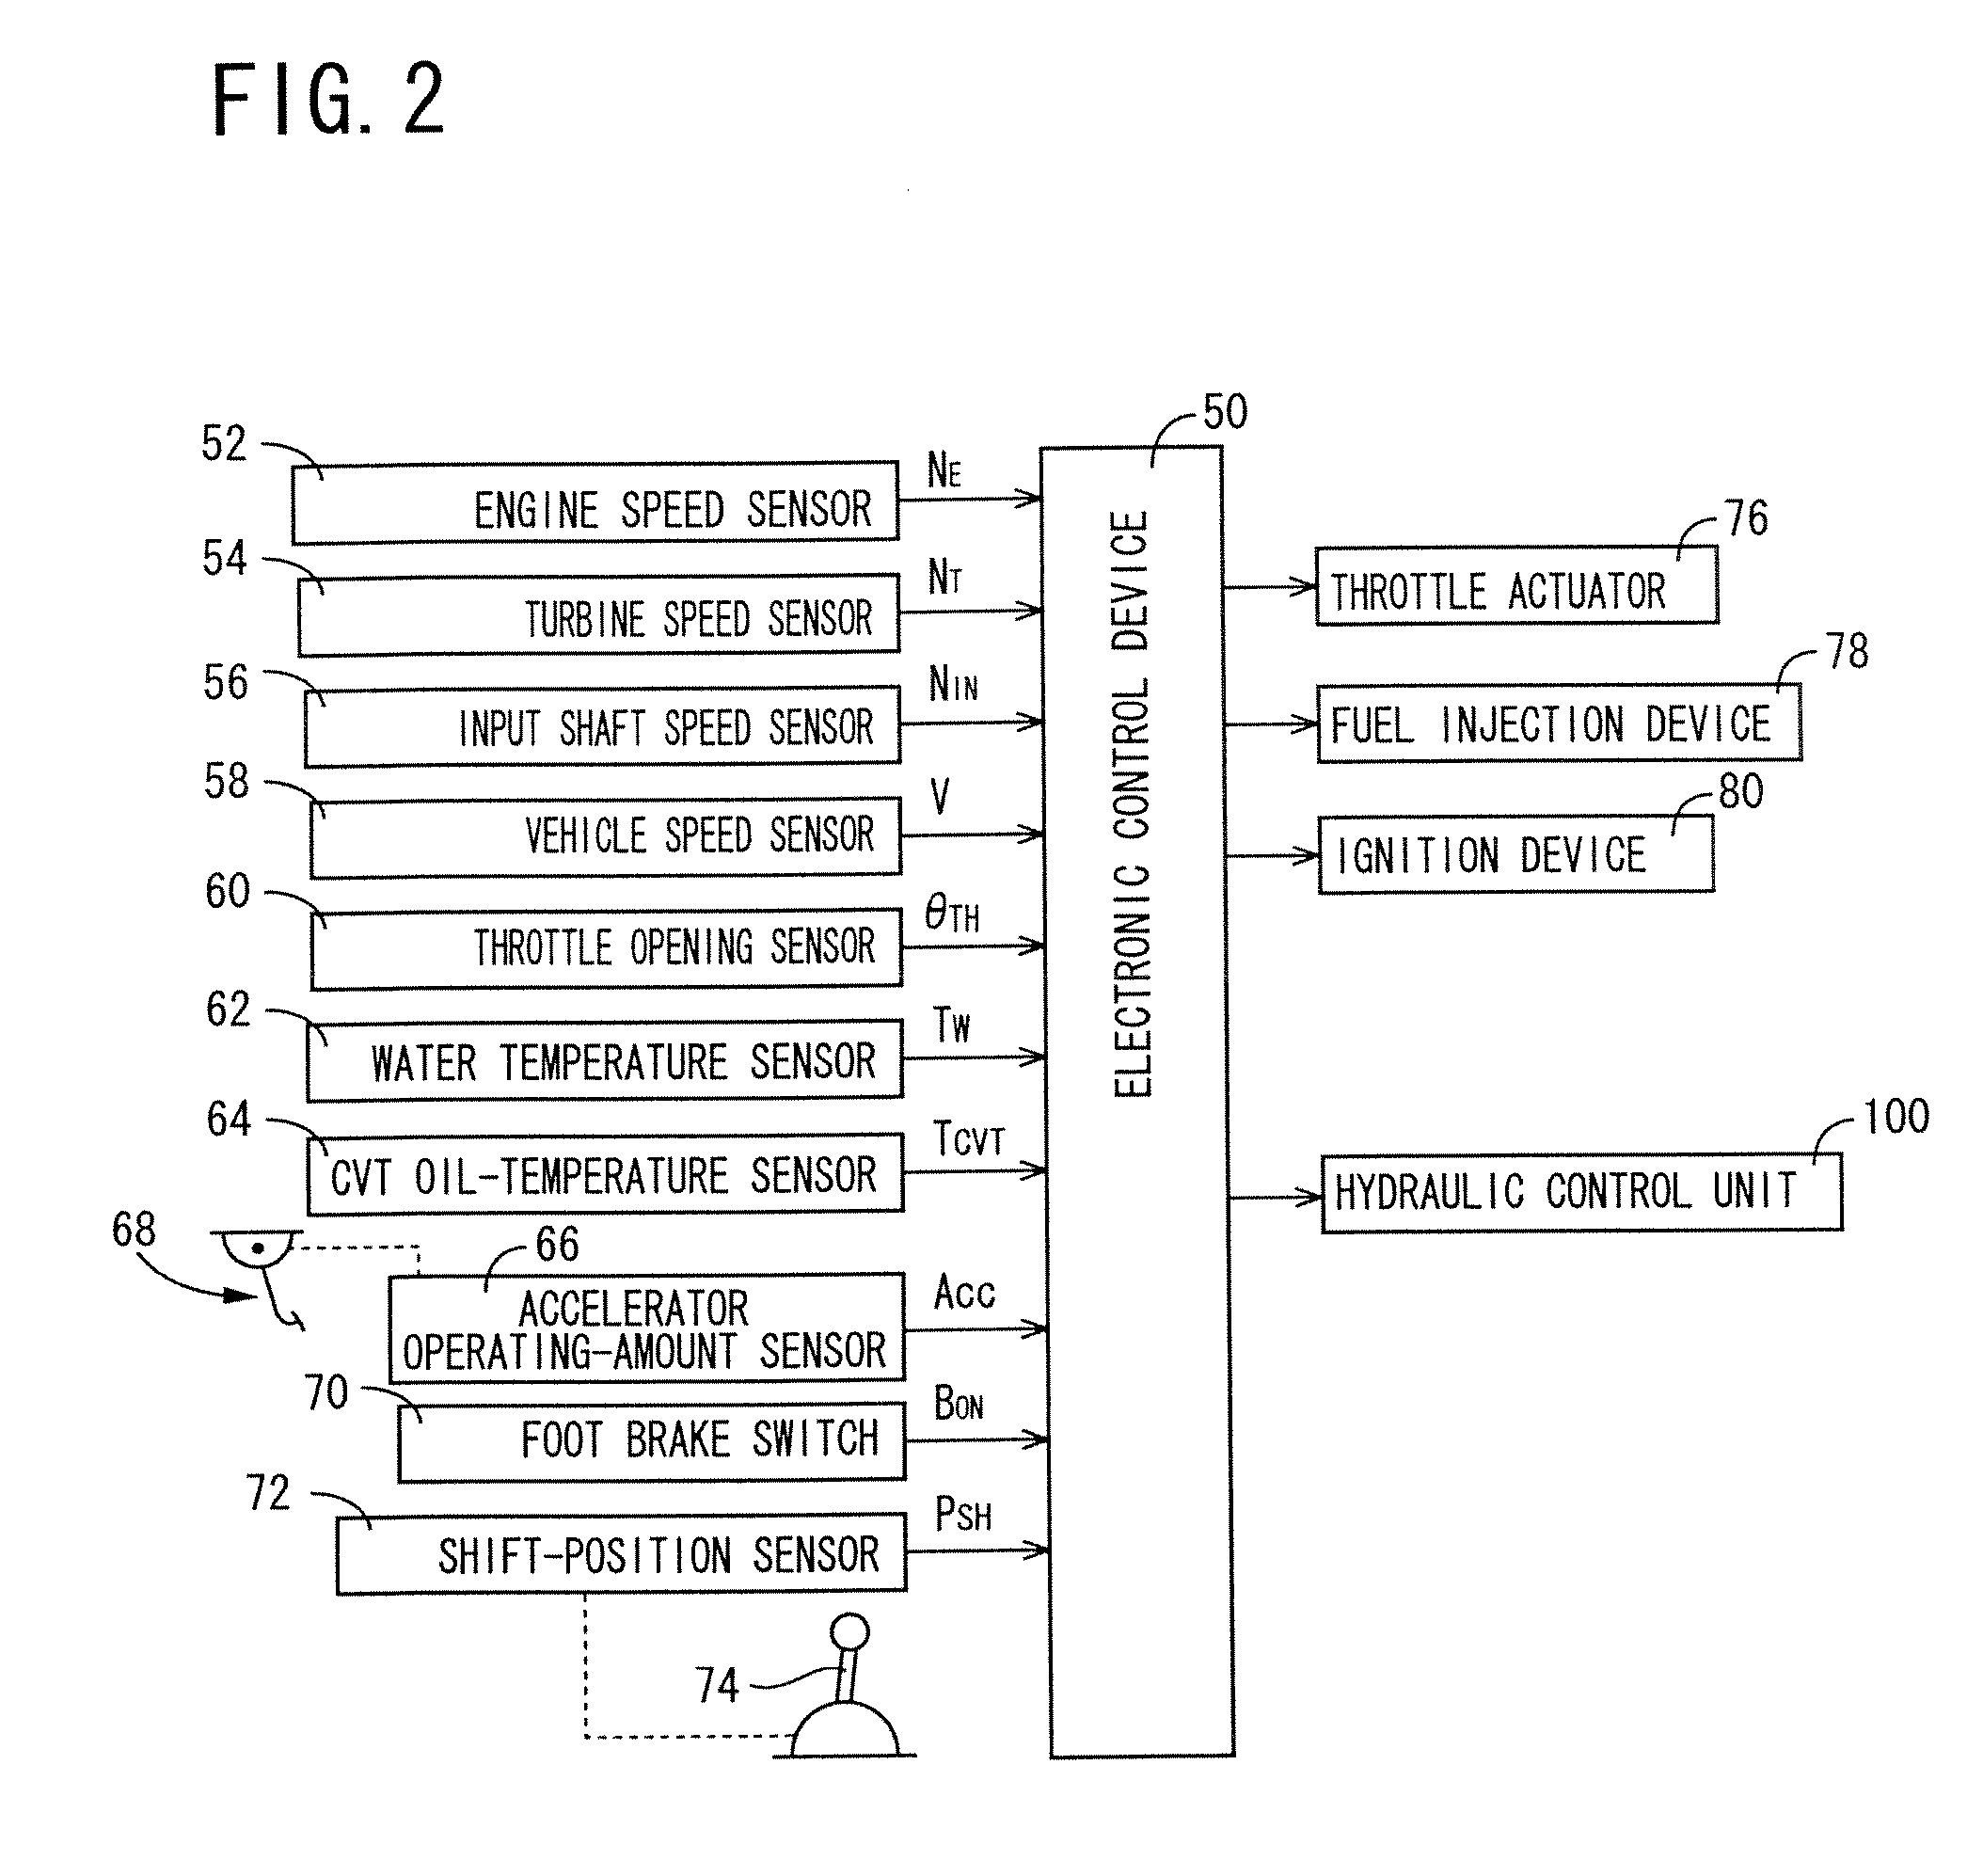 Speed-ratio control apparatus for vehicular continuously variable transmission